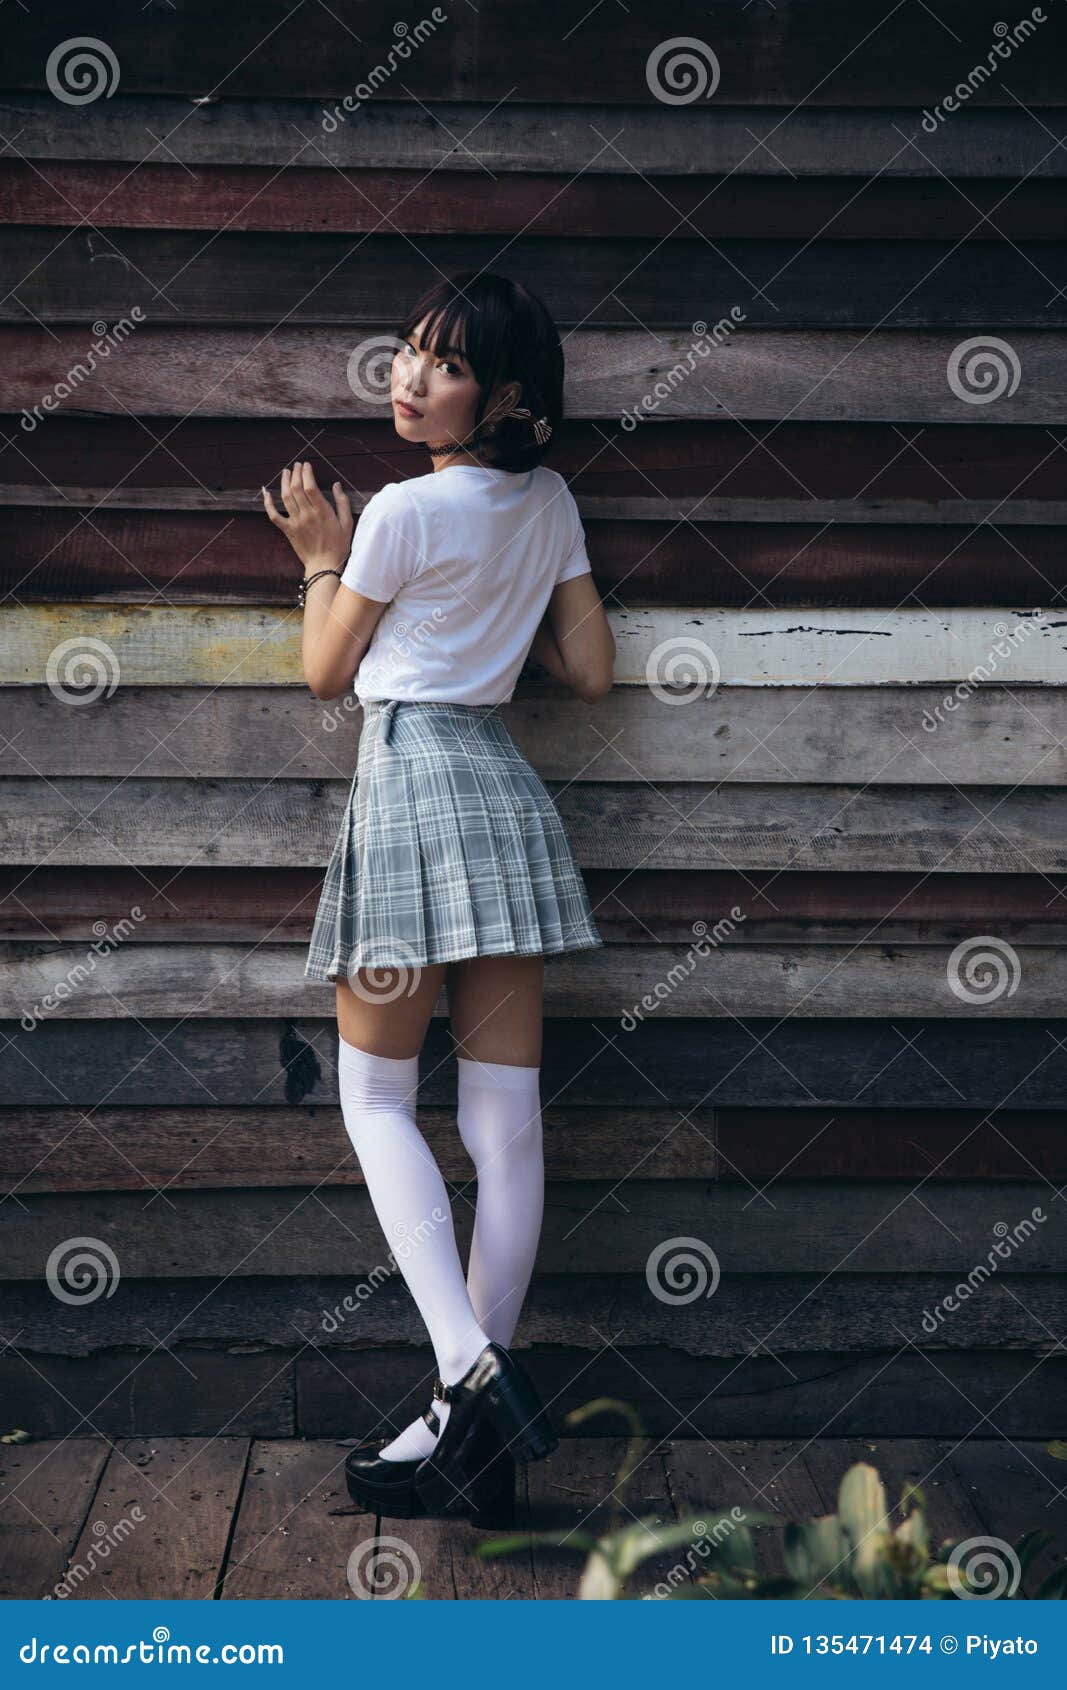 Portrait Of Asian Girl With White Shirt And Skirt Looking In Outdoor Nature Vintage Film Style